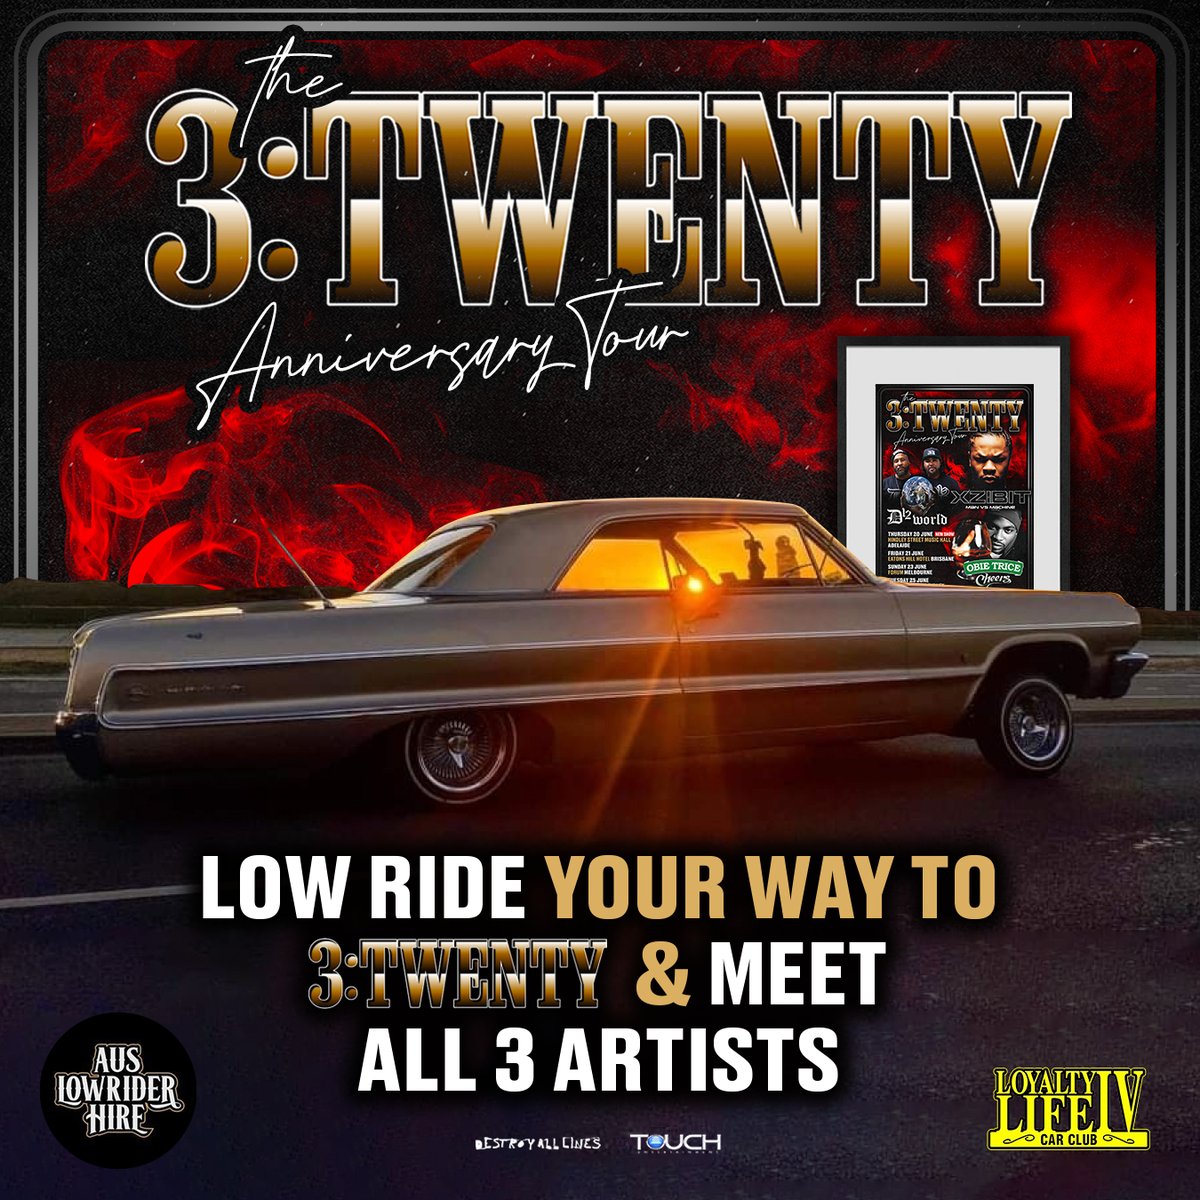 Grab tix to the 3: Twenty Australian Tour featuring @xzibit, @D12 & @realobietrice, & you could roll to the show in a Low Rider. Head to the link + tell us which song from the tour would set the vibe in the Low Rider. ➟ daltours.cc/3TwentyLowRider